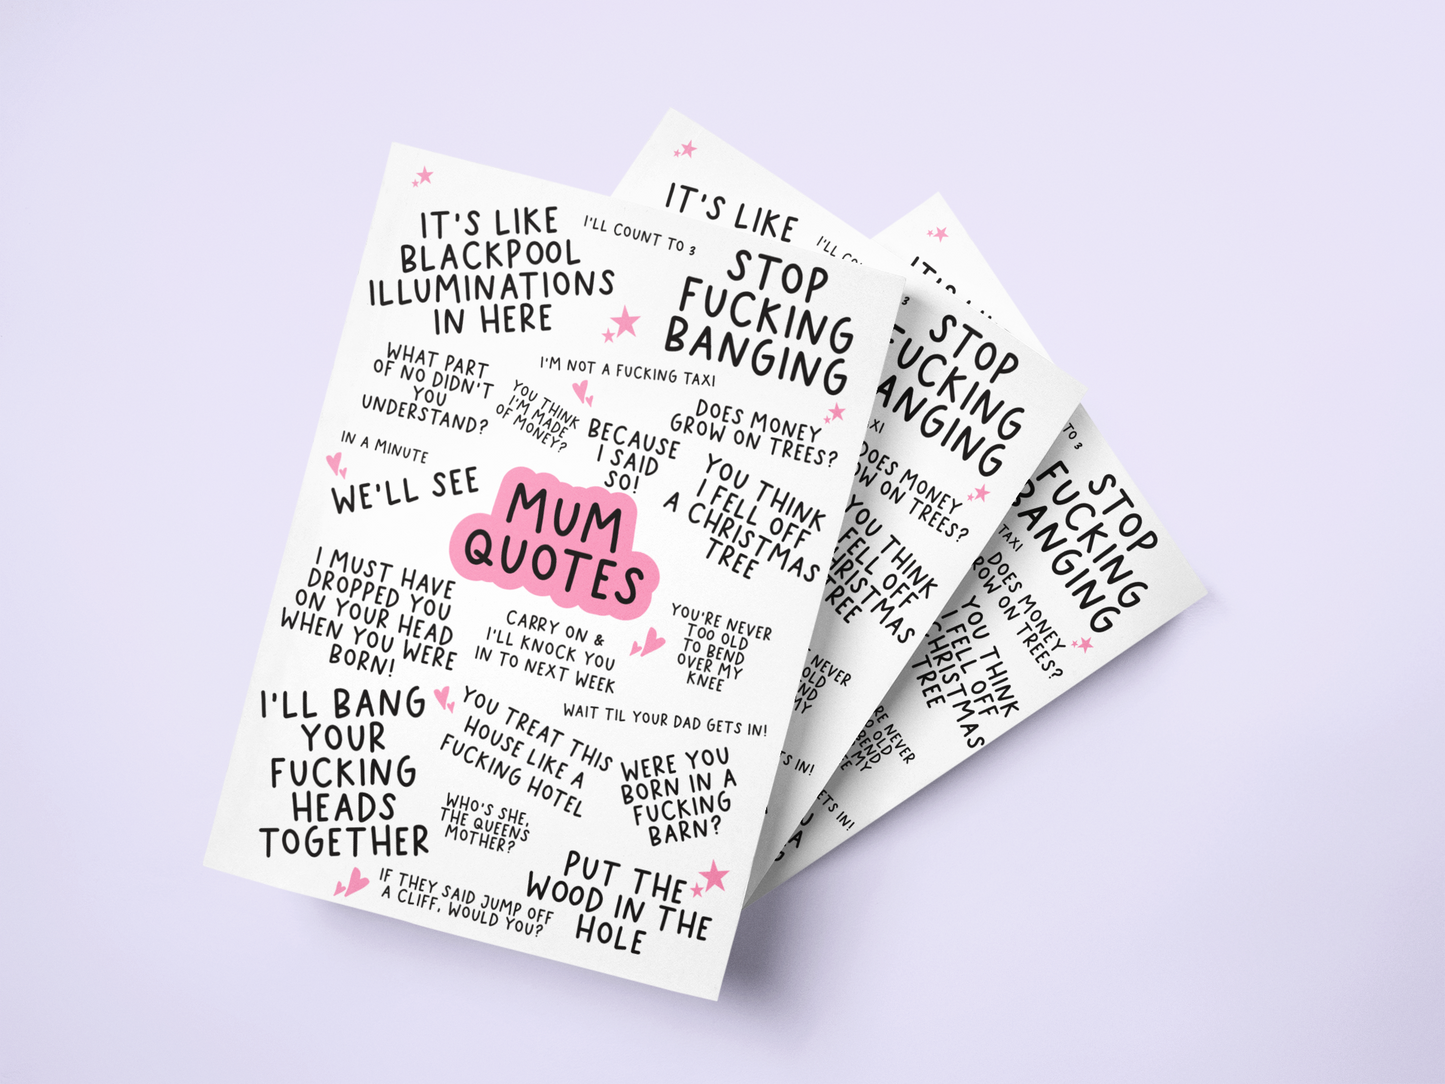 Notebook featuring famous mum quotes which include 'stop fucking banging, it's like blackpool illuminations in here & i'll bang your fucking heads together'.